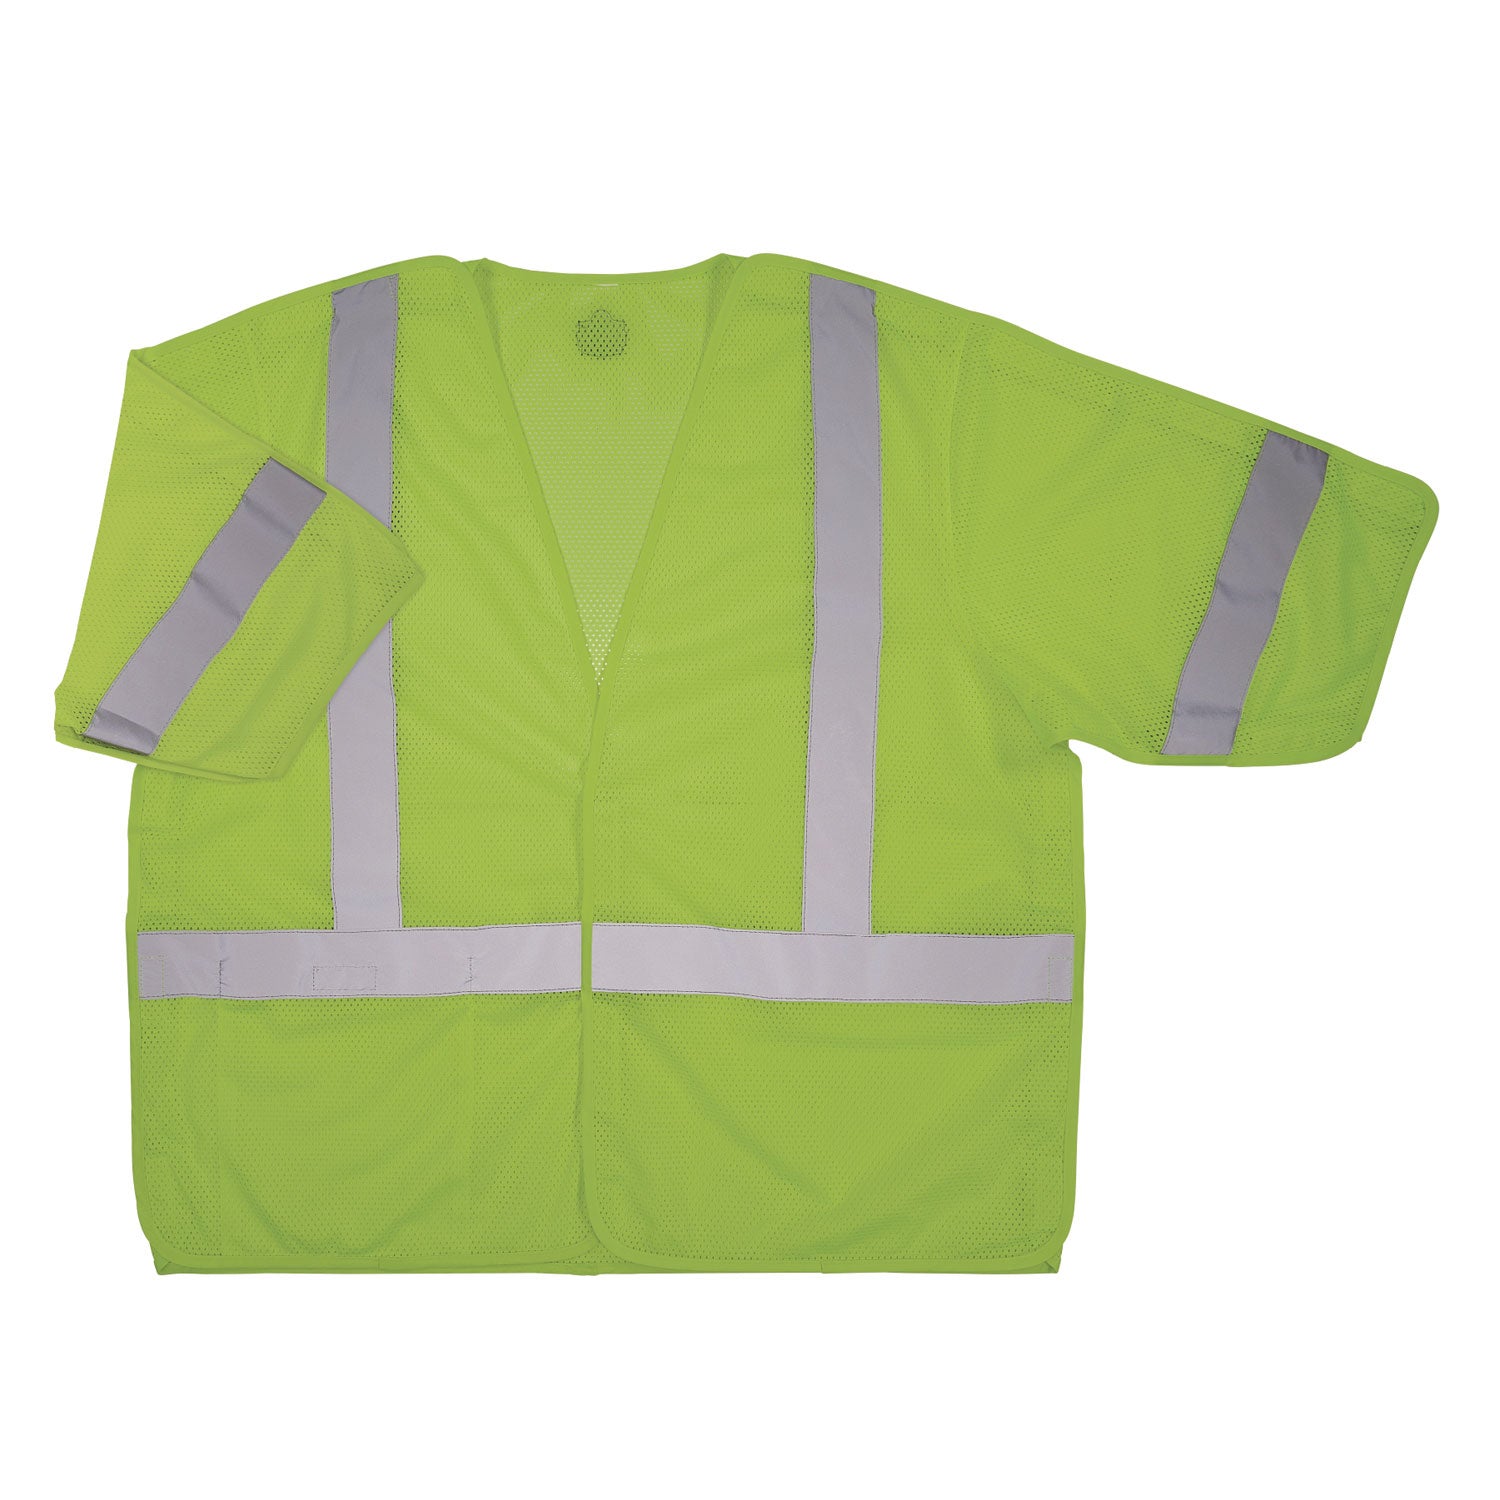 glowear-8315ba-class-3-hi-vis-breakaway-safety-vest-small-to-medium-lime-ships-in-1-3-business-days_ego23053 - 1